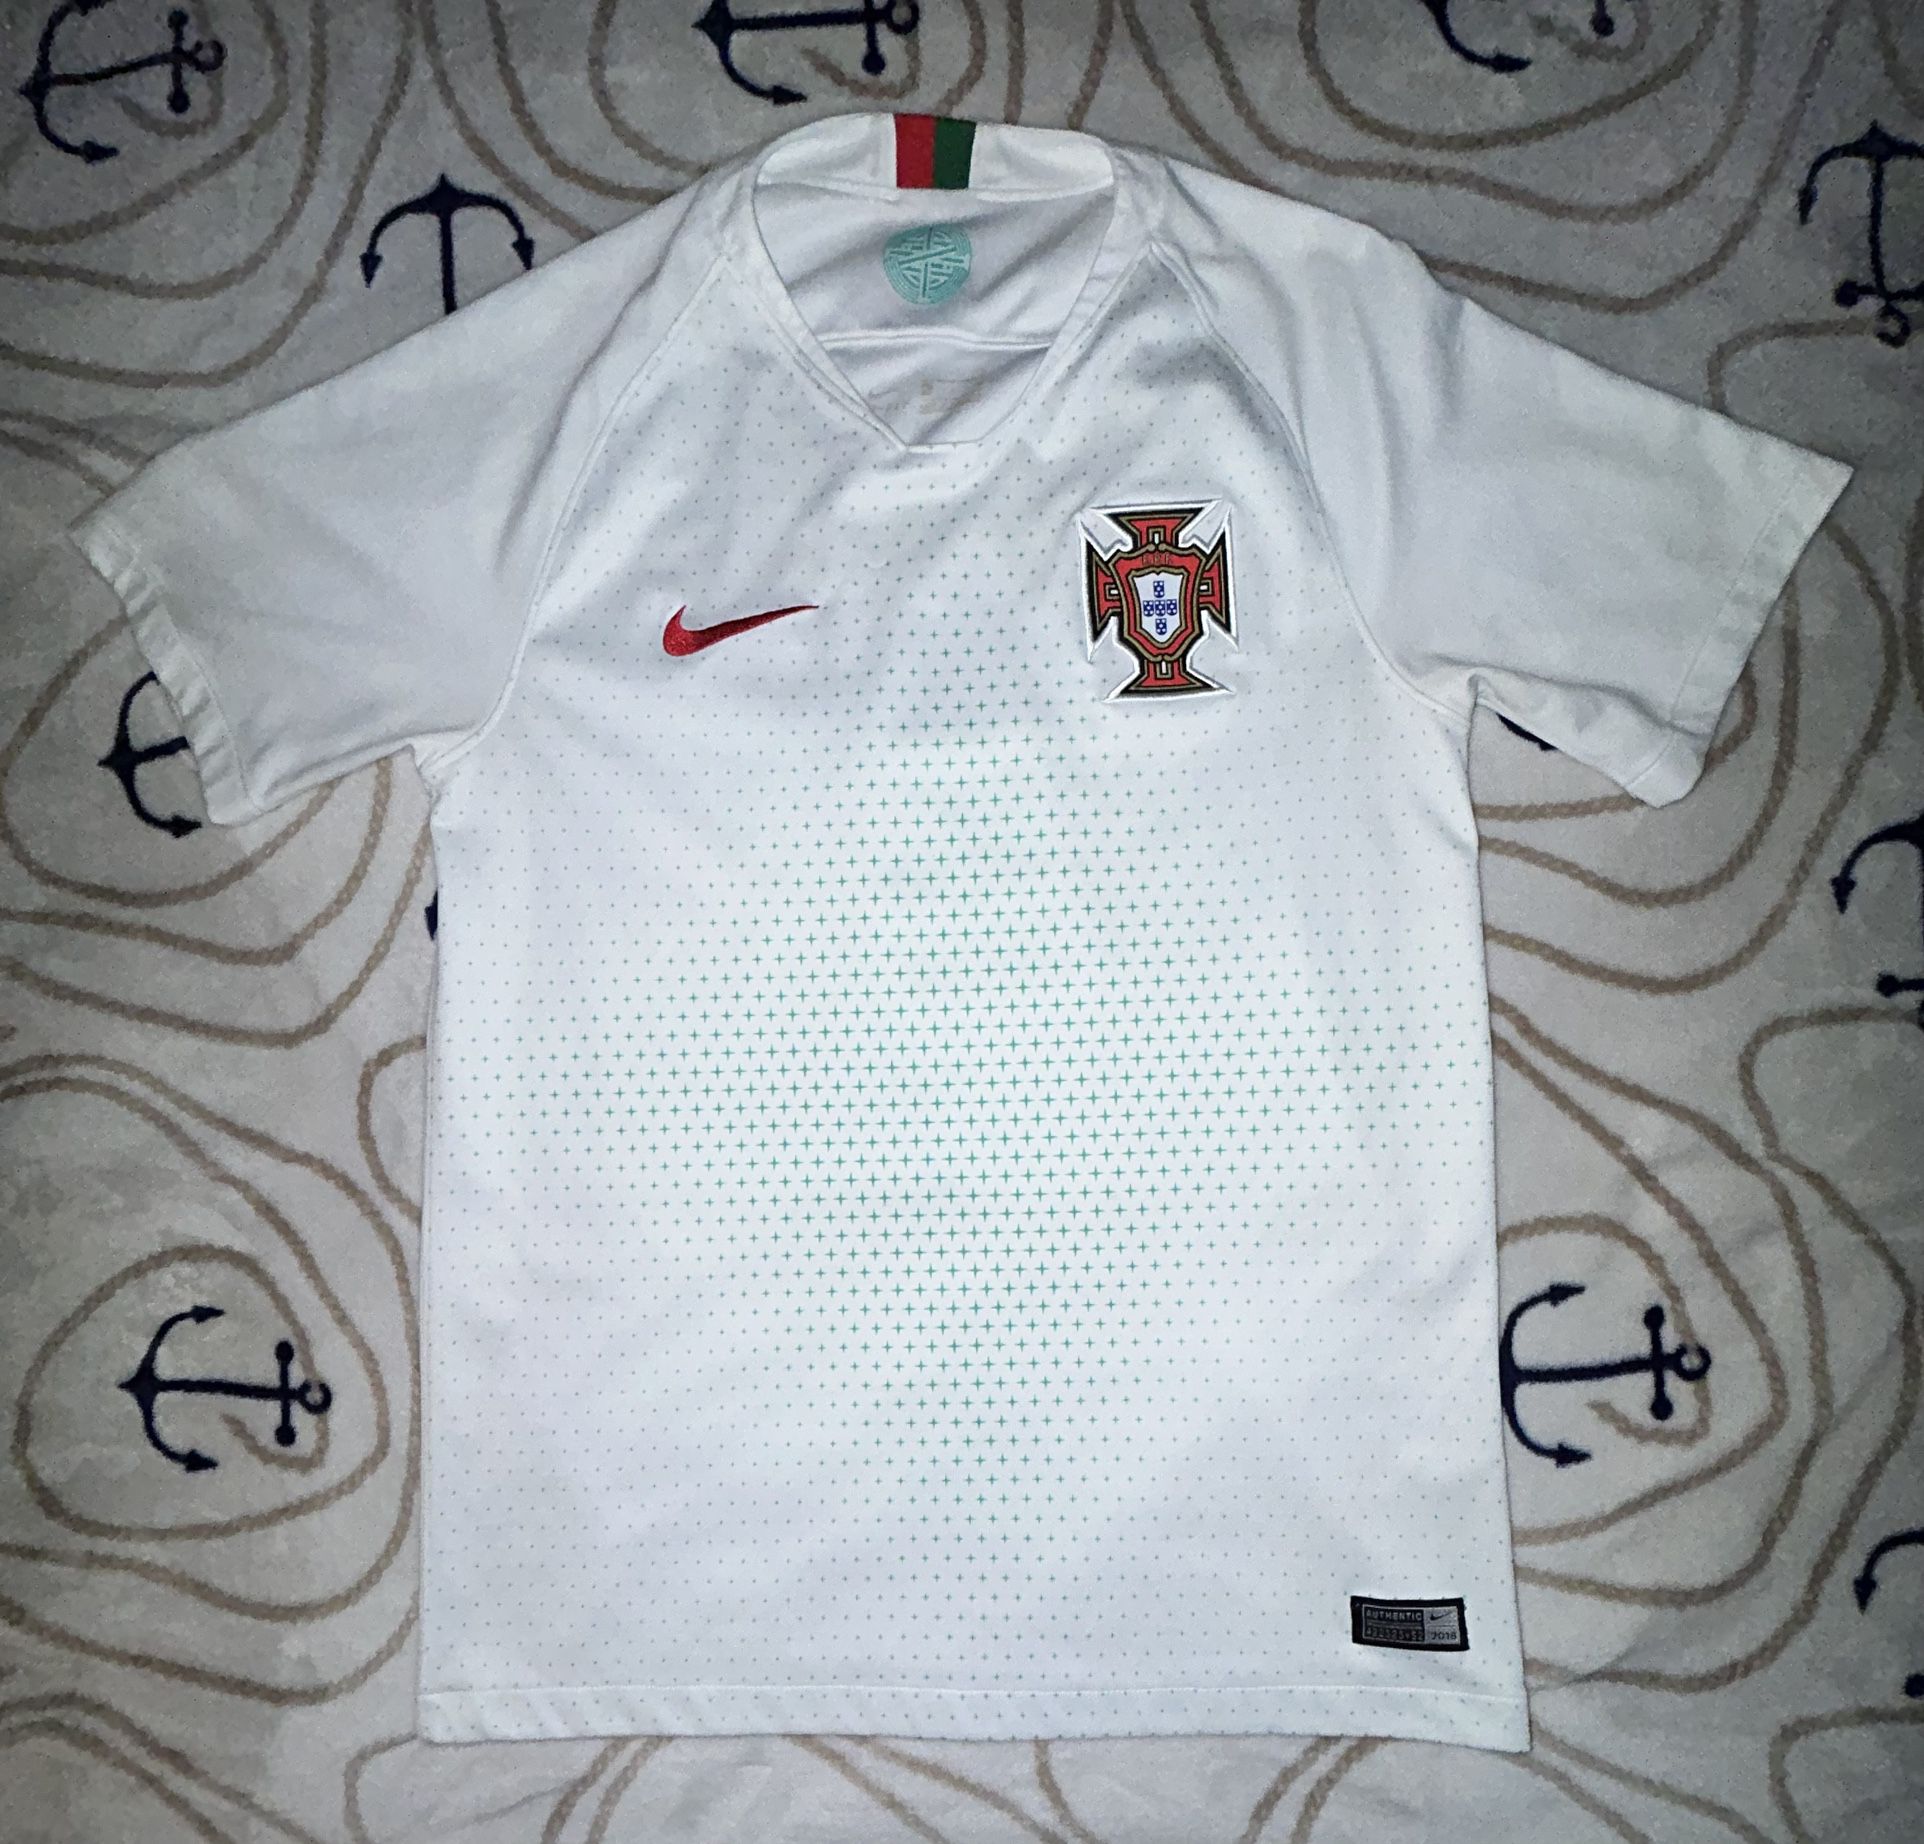 Portugal white and green Soccer jersey